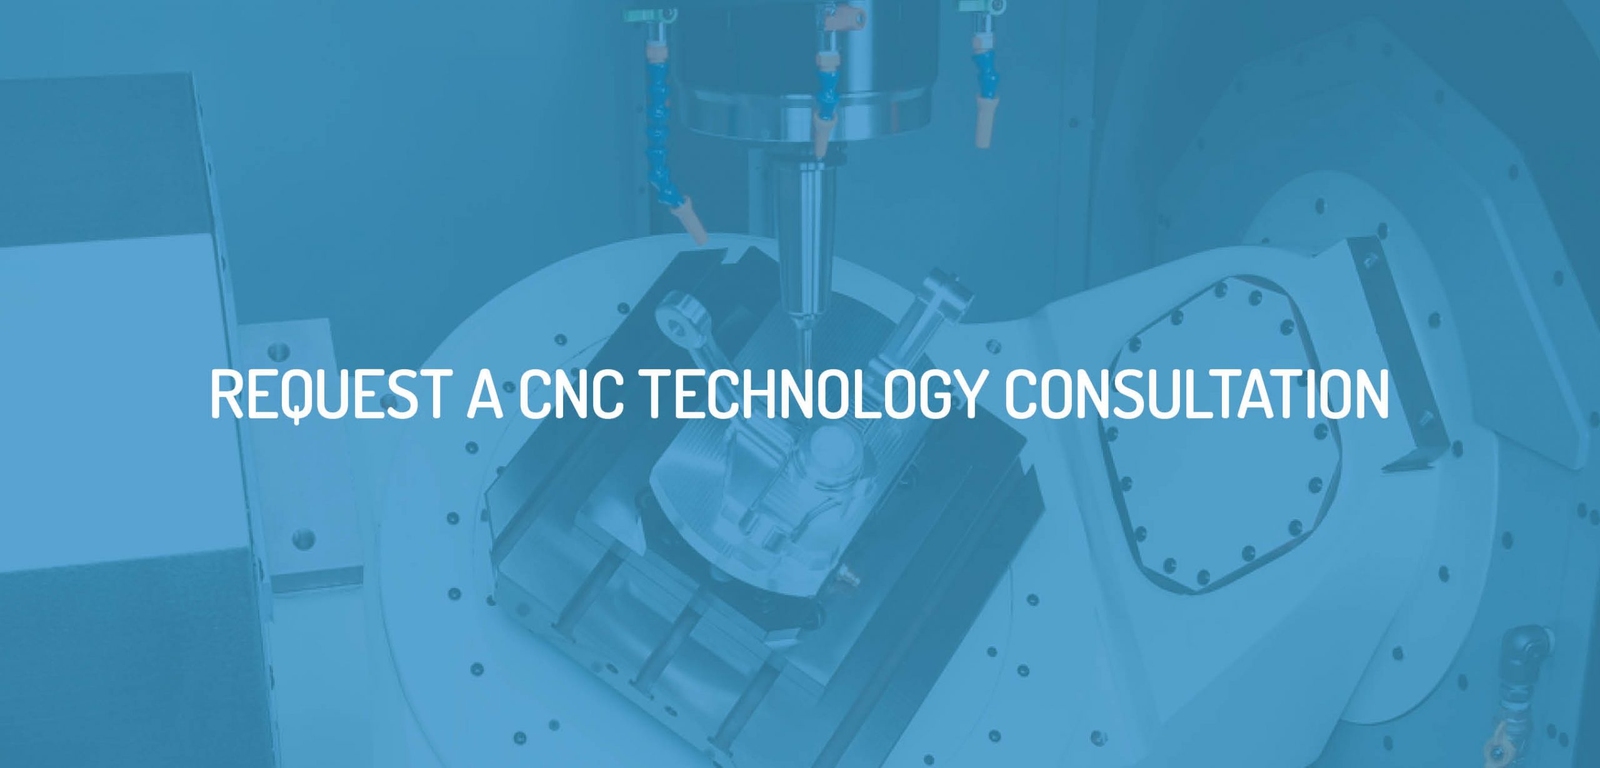 Request a CNC Technology Consultation from our Specialists